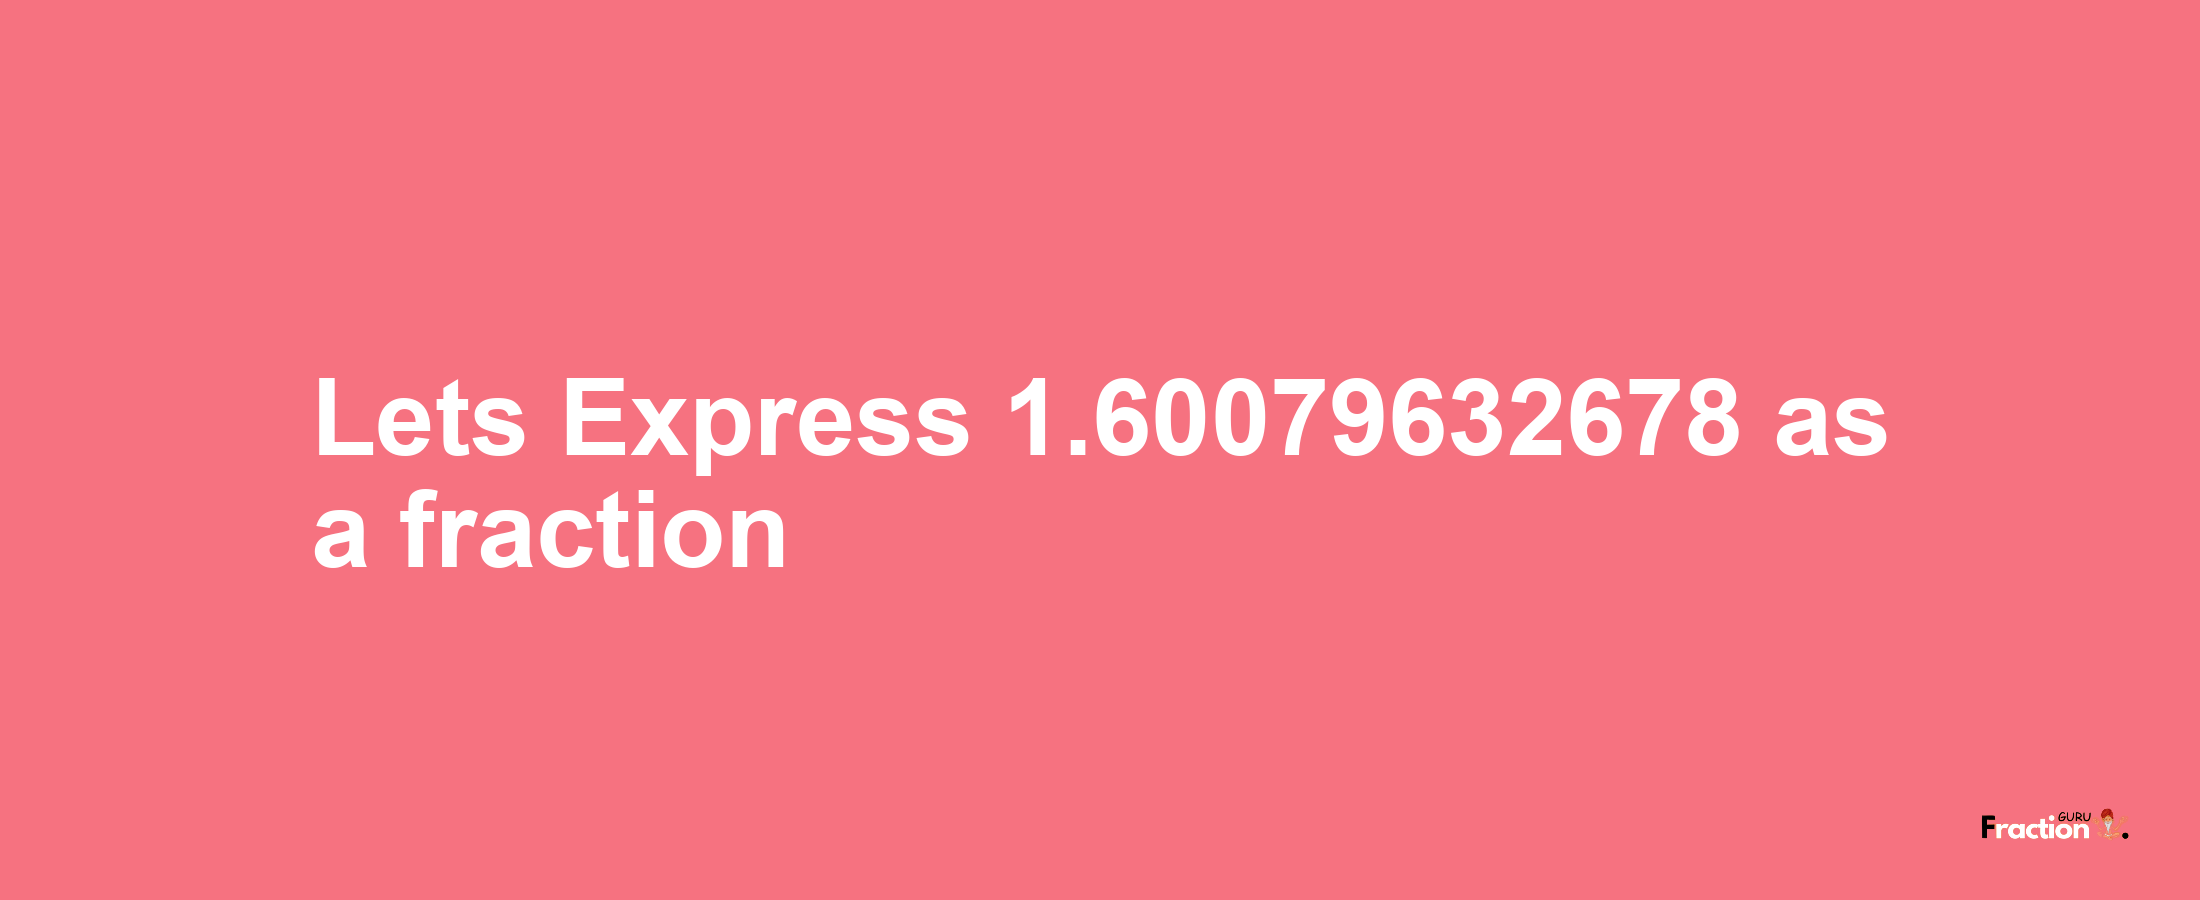 Lets Express 1.60079632678 as afraction